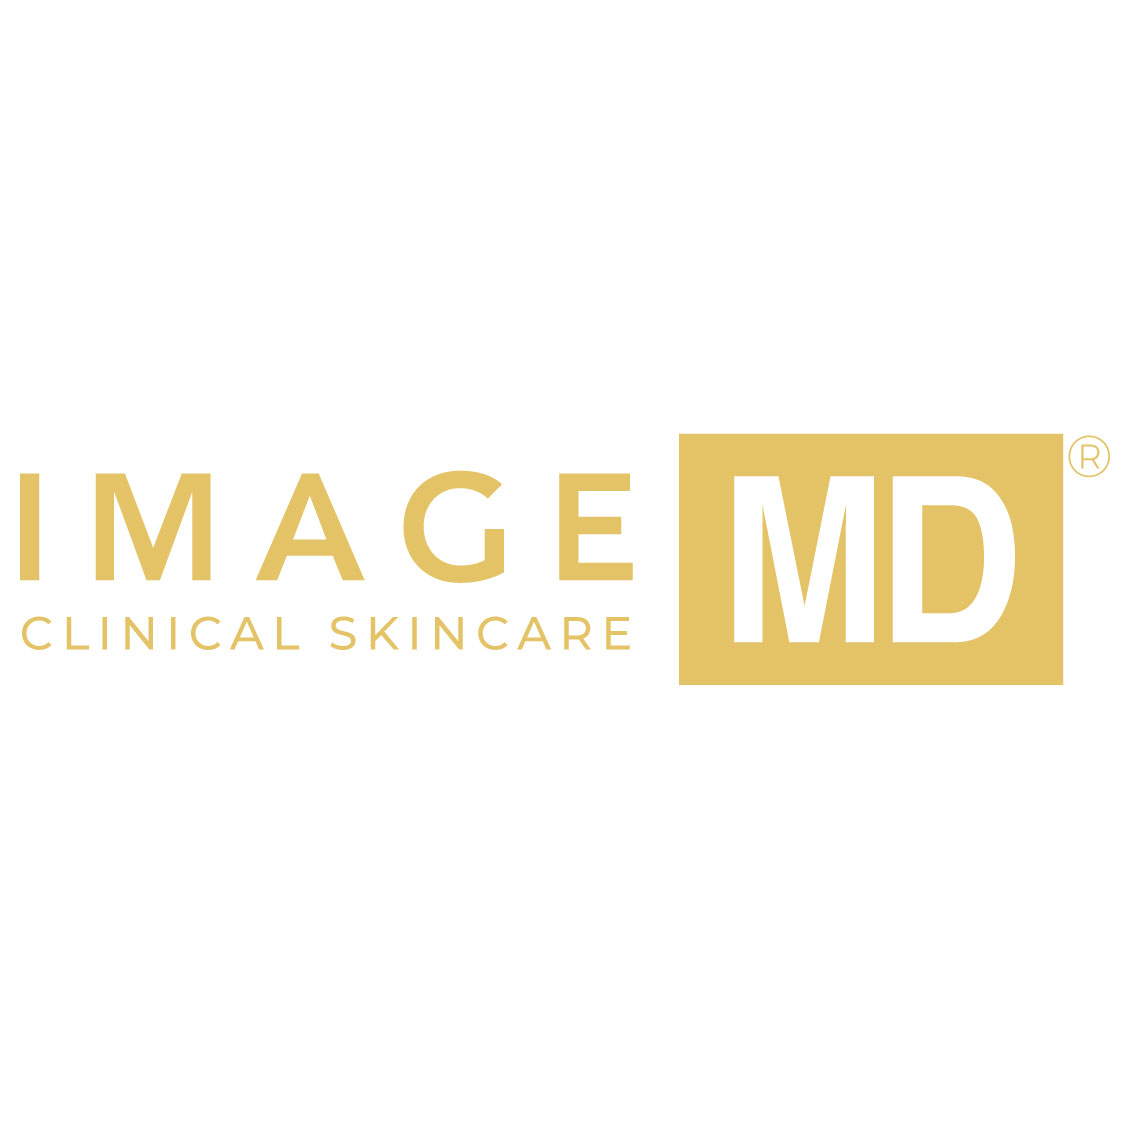 Image Clinical Skincare MD